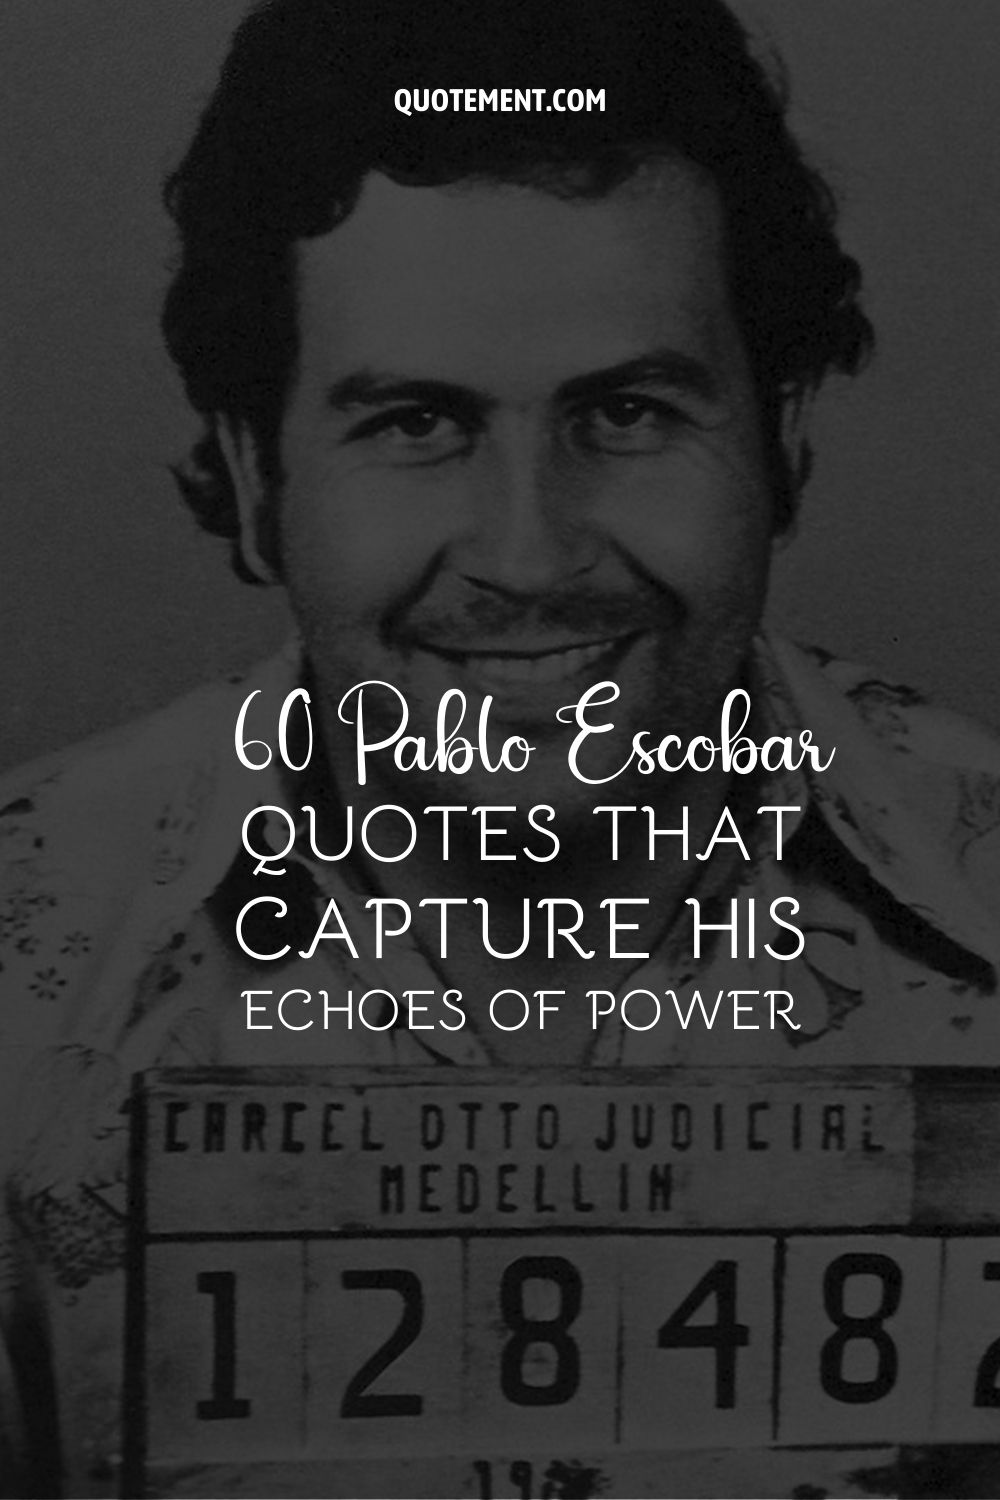 60 Pablo Escobar Quotes That Capture His Echoes Of Power
